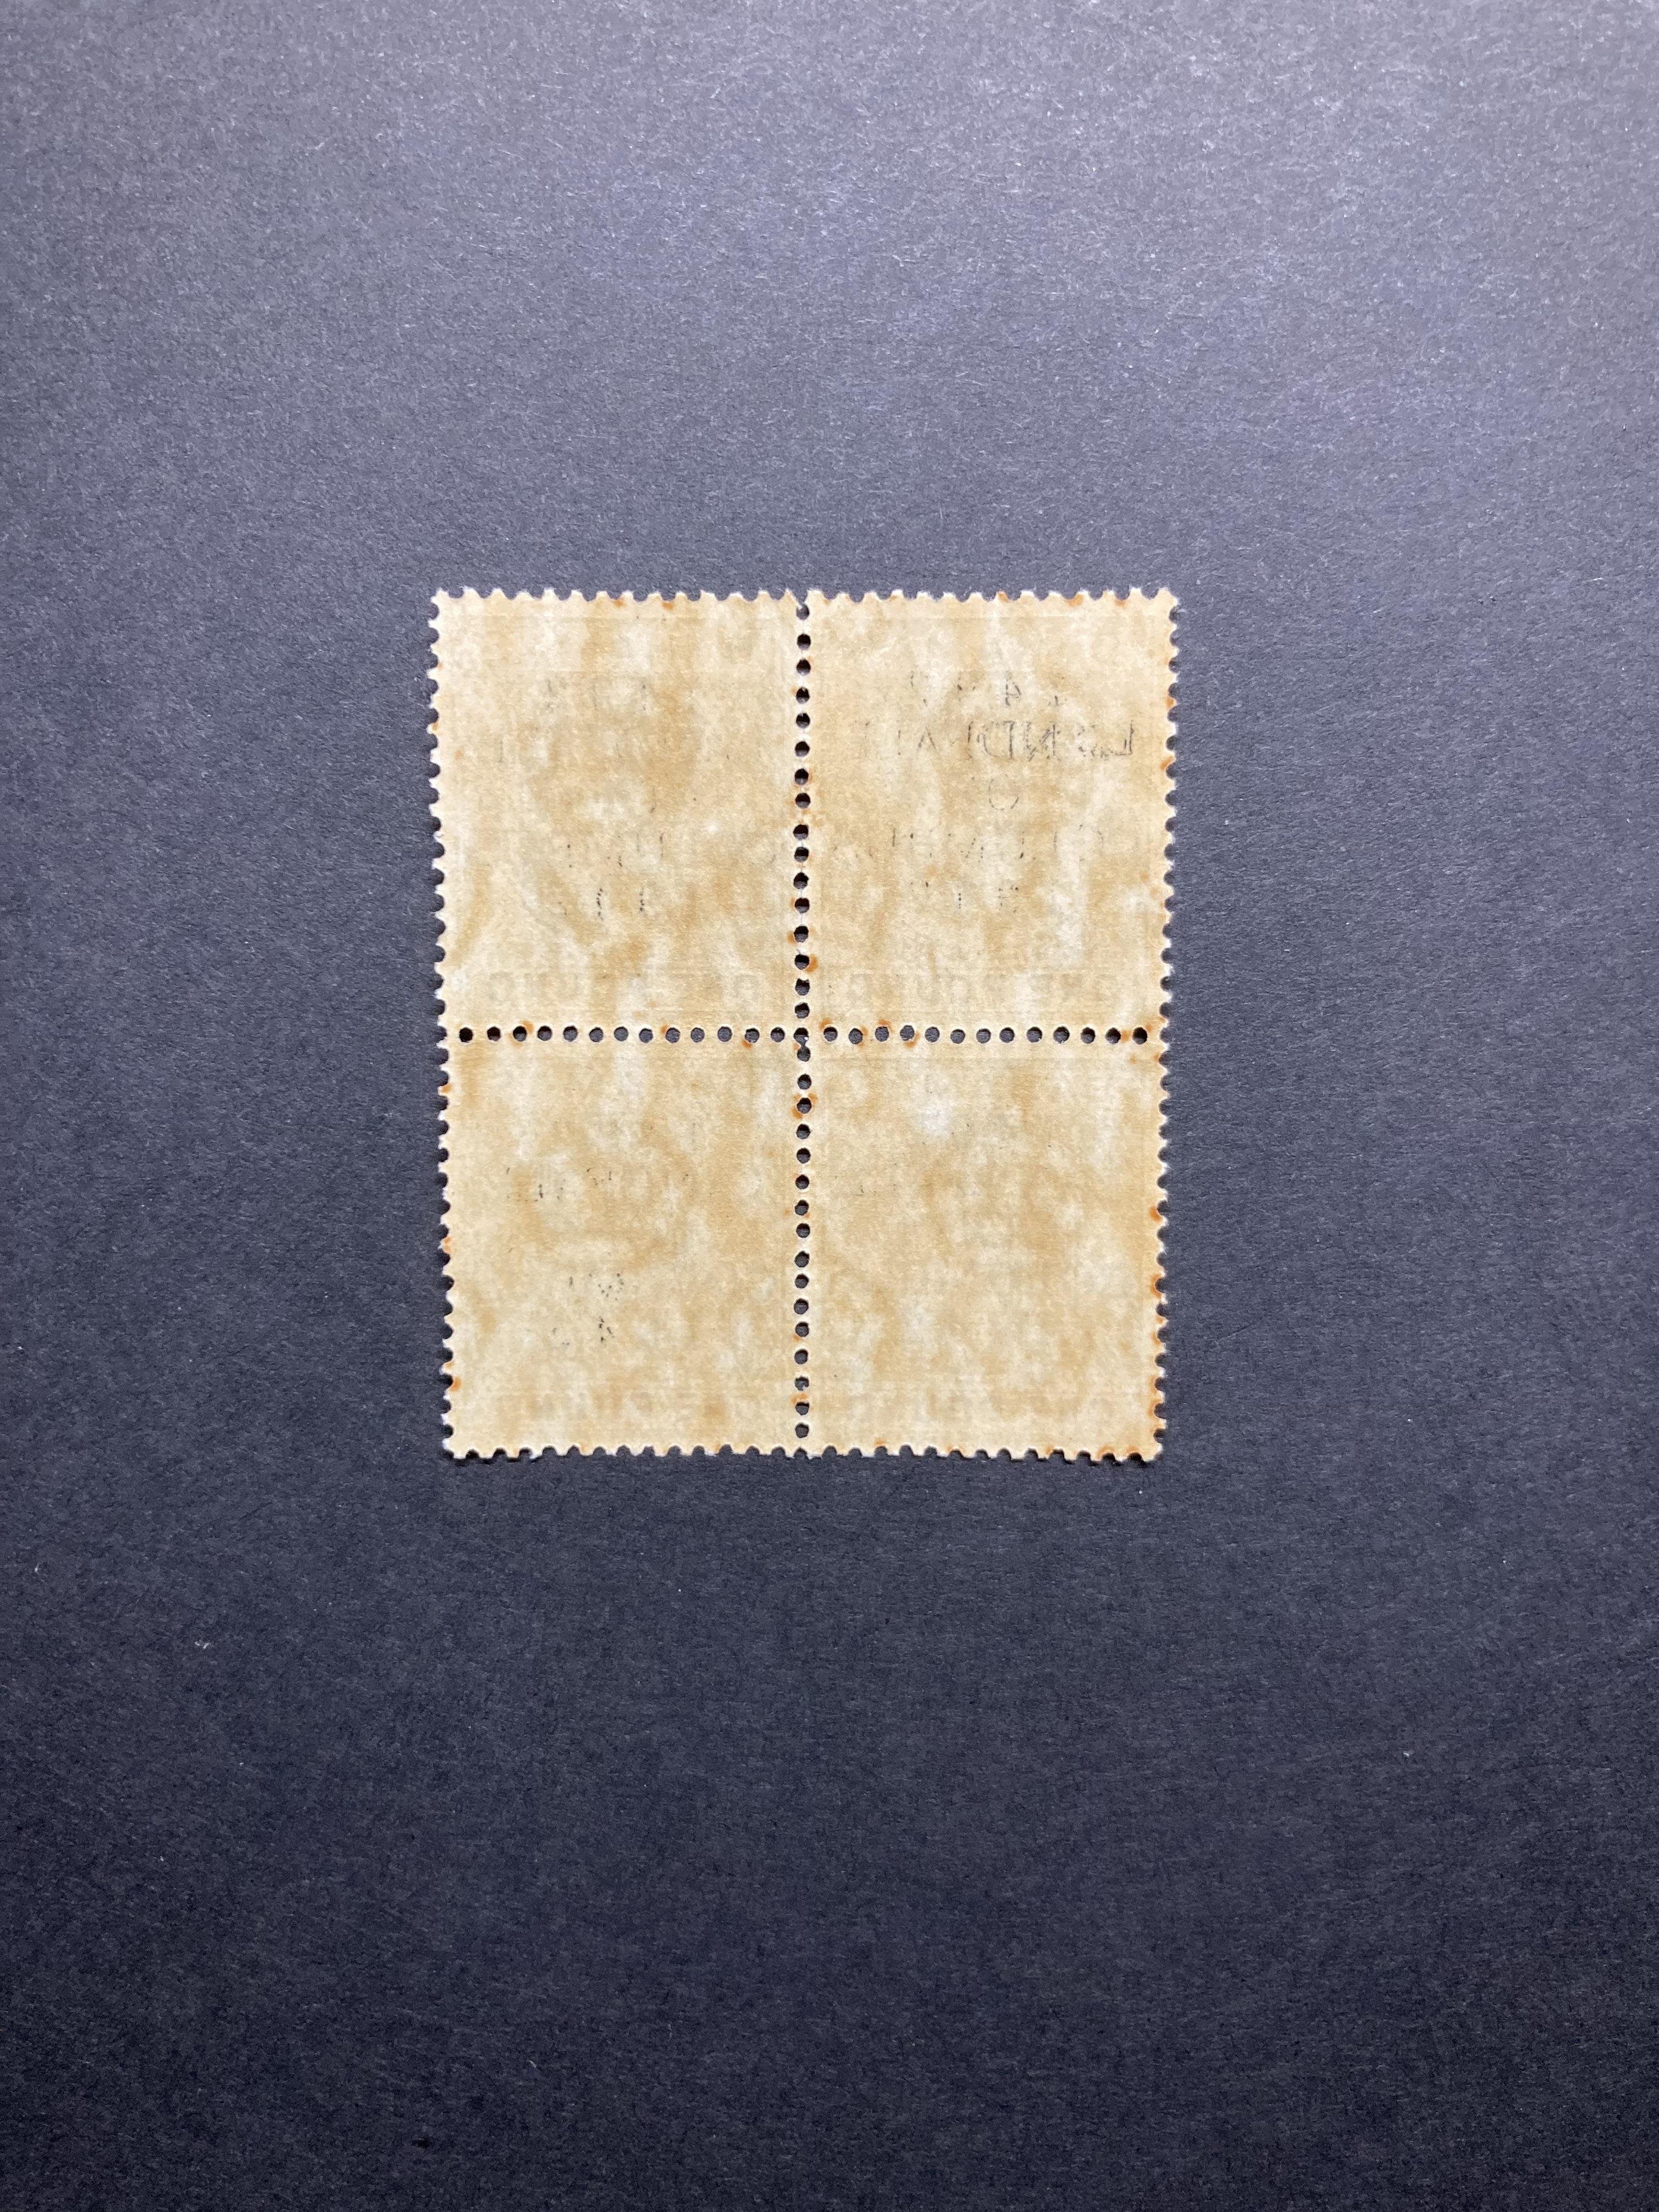 Bahamas stamps: KGVI £1 Landfall of Columbus mint block of 4, thick paper, SG 175, cat £320 - Image 2 of 2